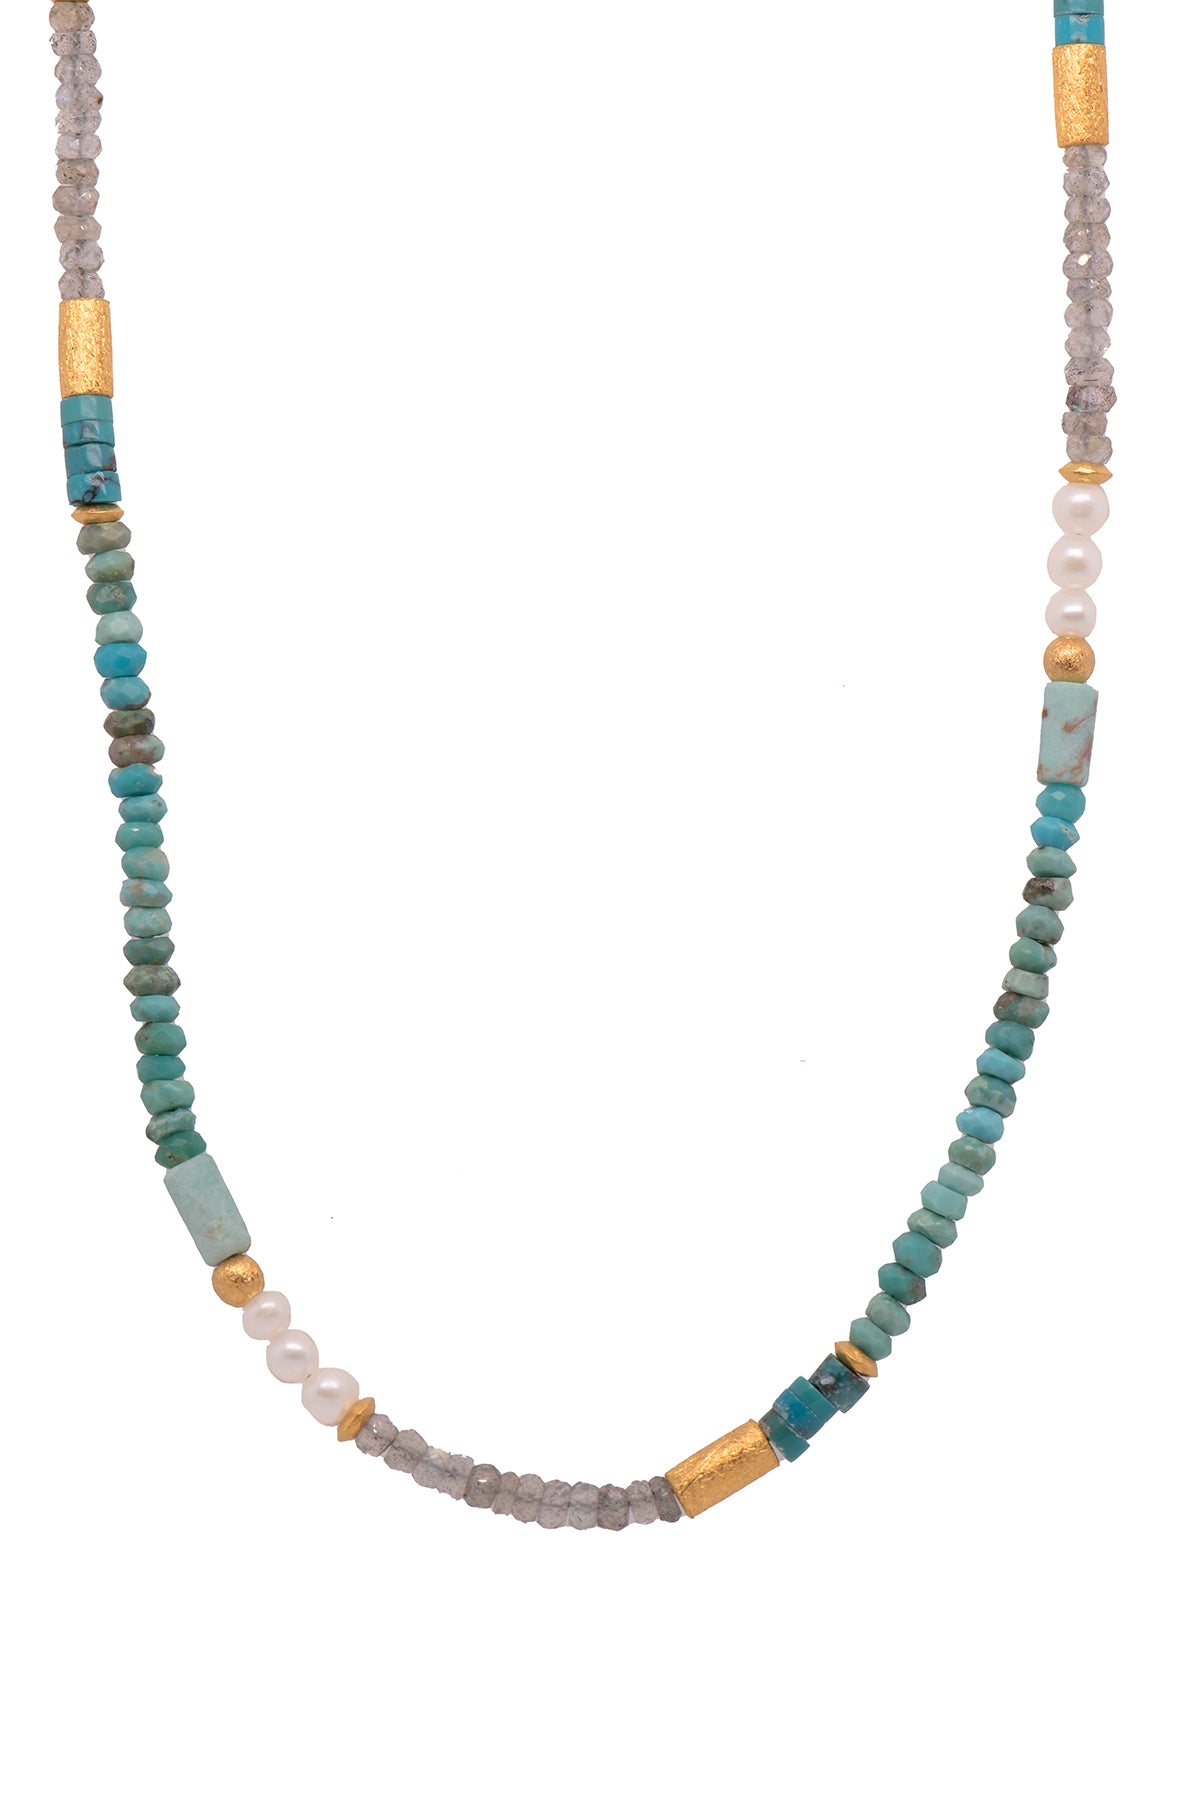 Turquoise, White Pearls , Labradorite, and Chrysocolla Necklace 24K Fair Trade Gold Vermeil